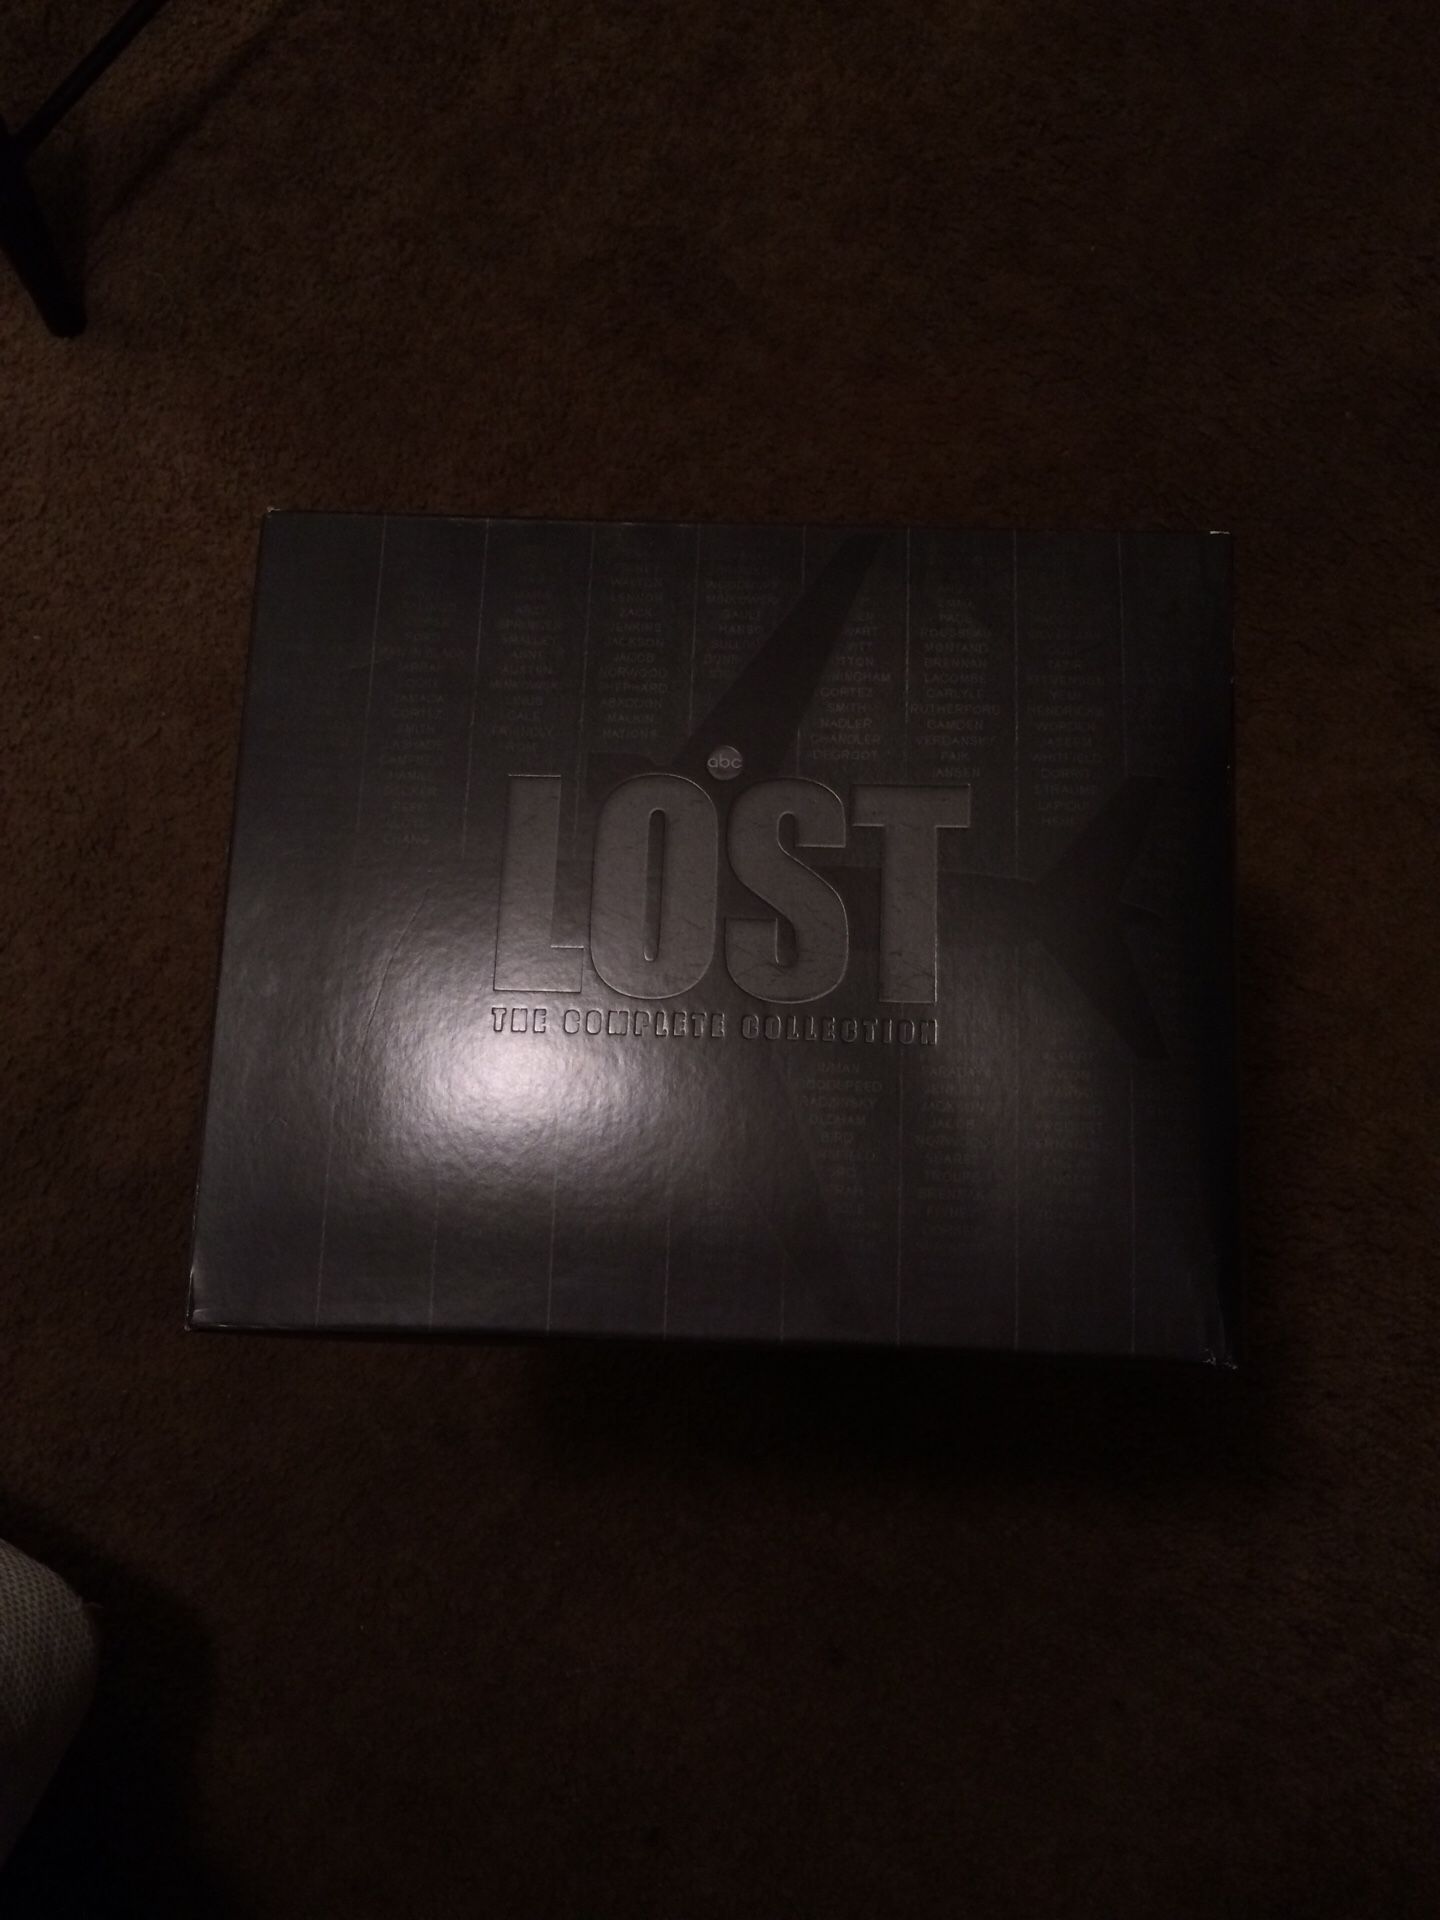 Lost the complete blue ray collection.